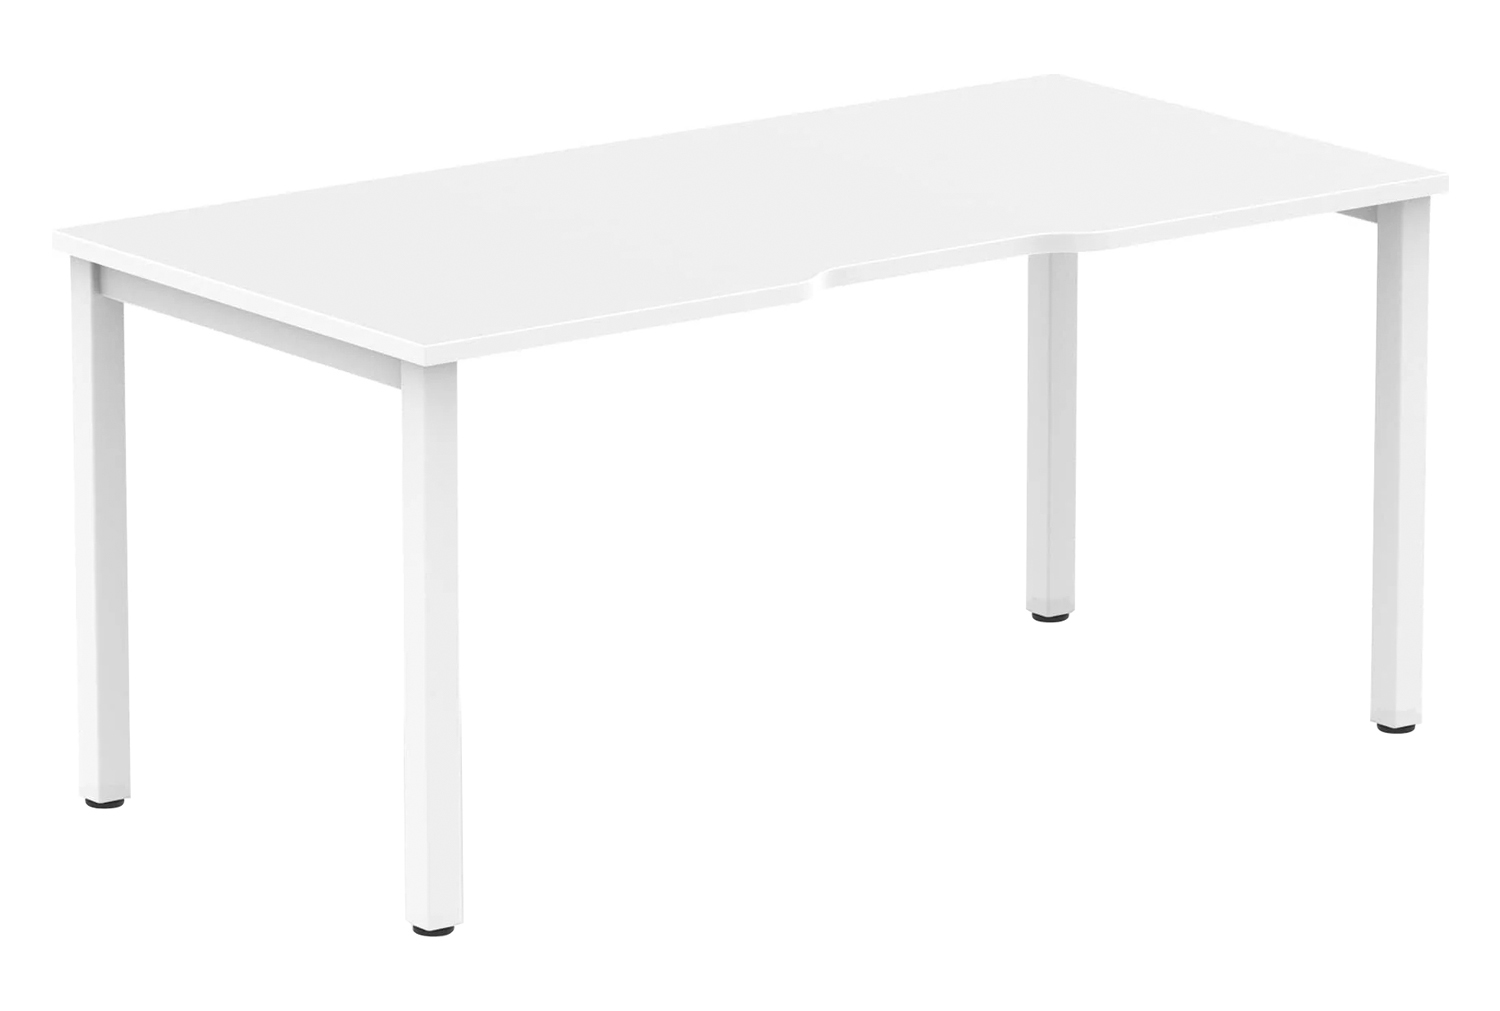 Pamola Single Bench Office Desk (White Legs), 120wx80dx73h (cm), White, Express Delivery